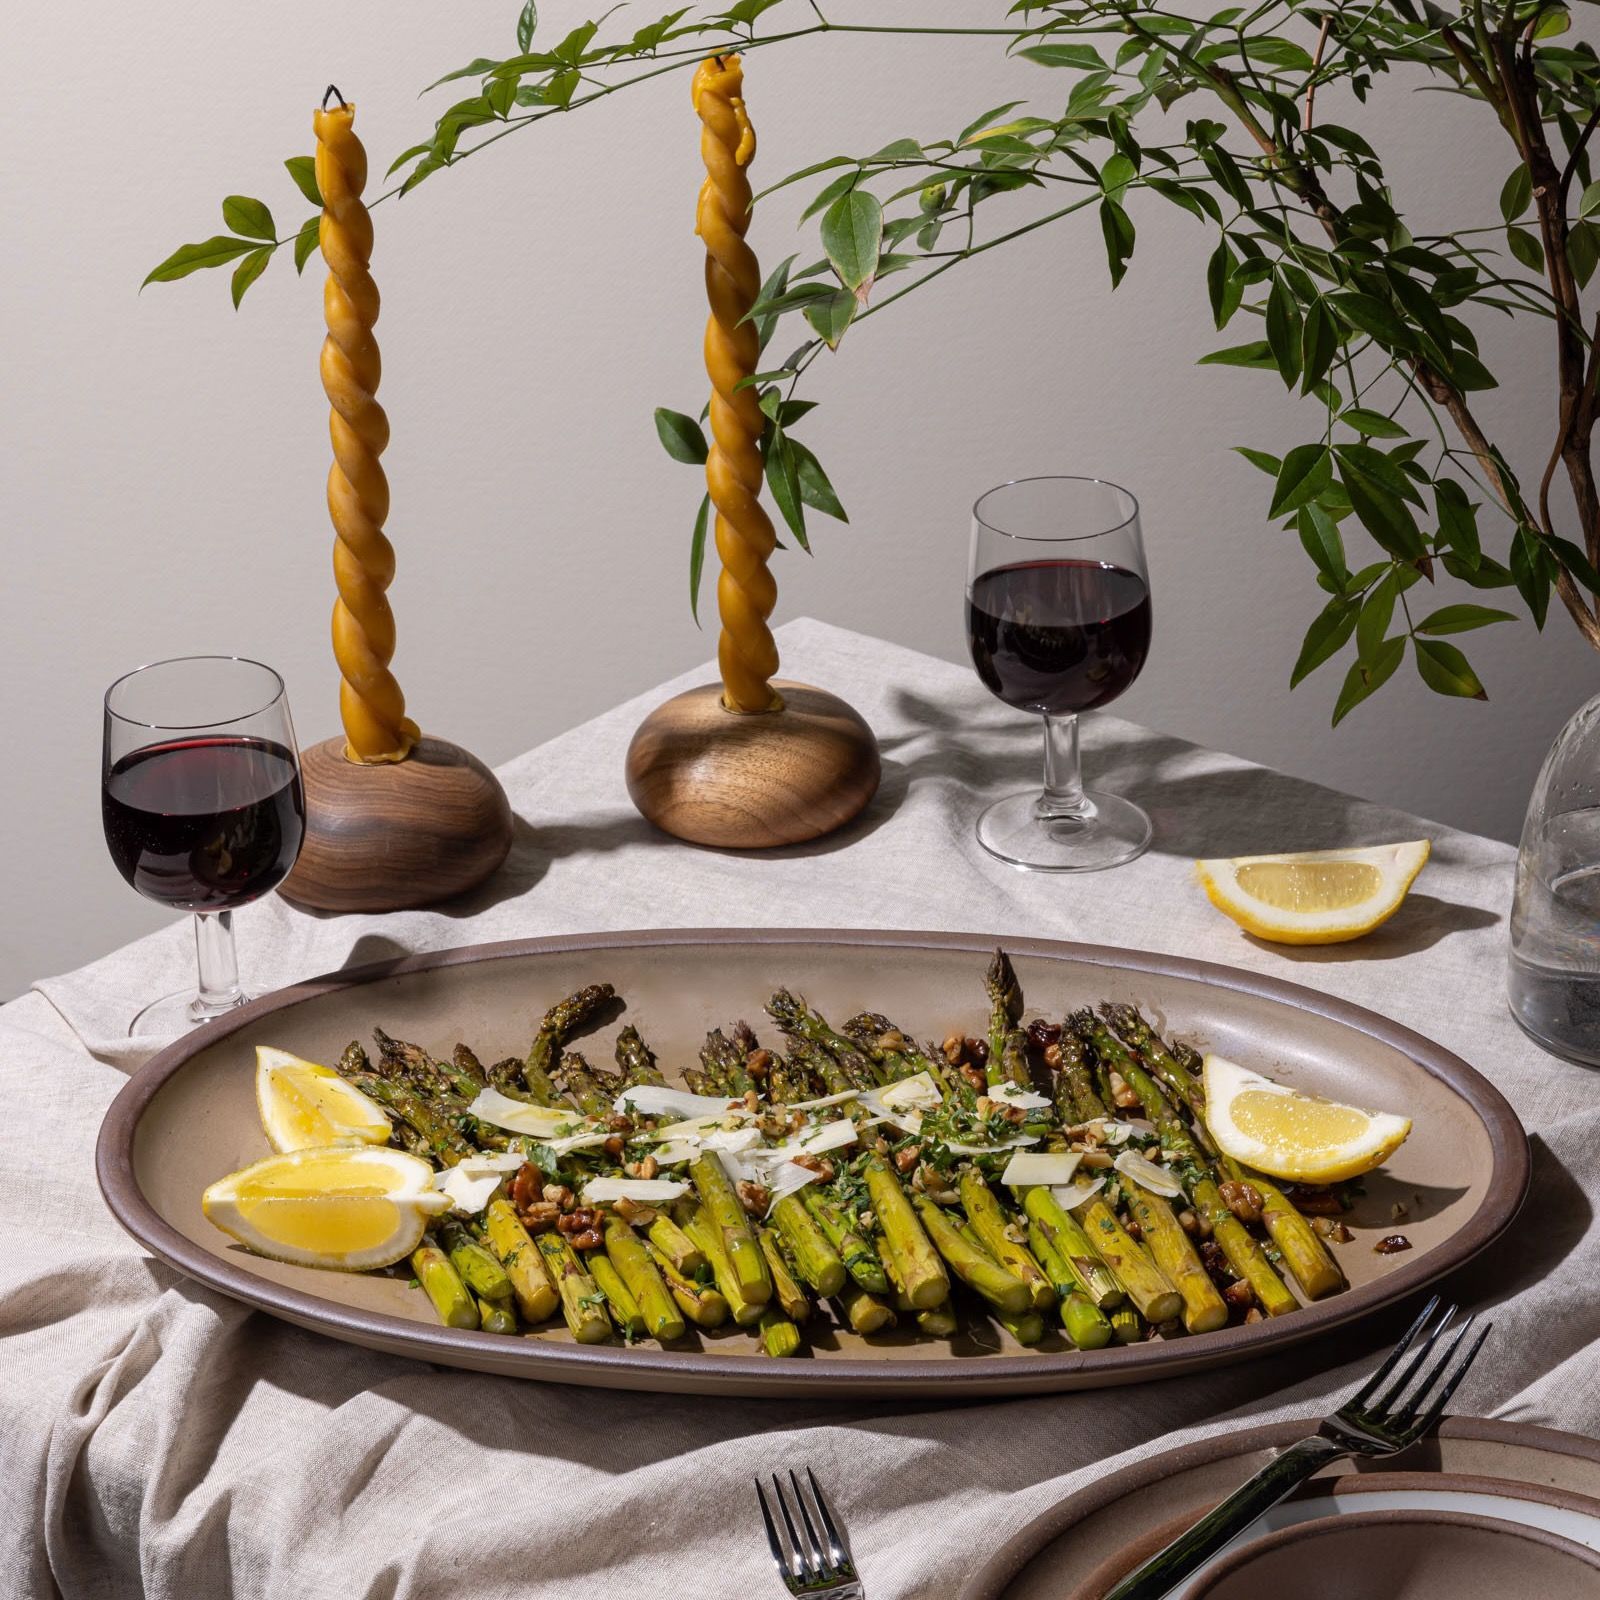 A ceramic oval platter in a taupe colors sits on a table with a spread of cooked asparagus and lemon slices. Surrounding is wine glasses, silverware, and twisted taper candles.